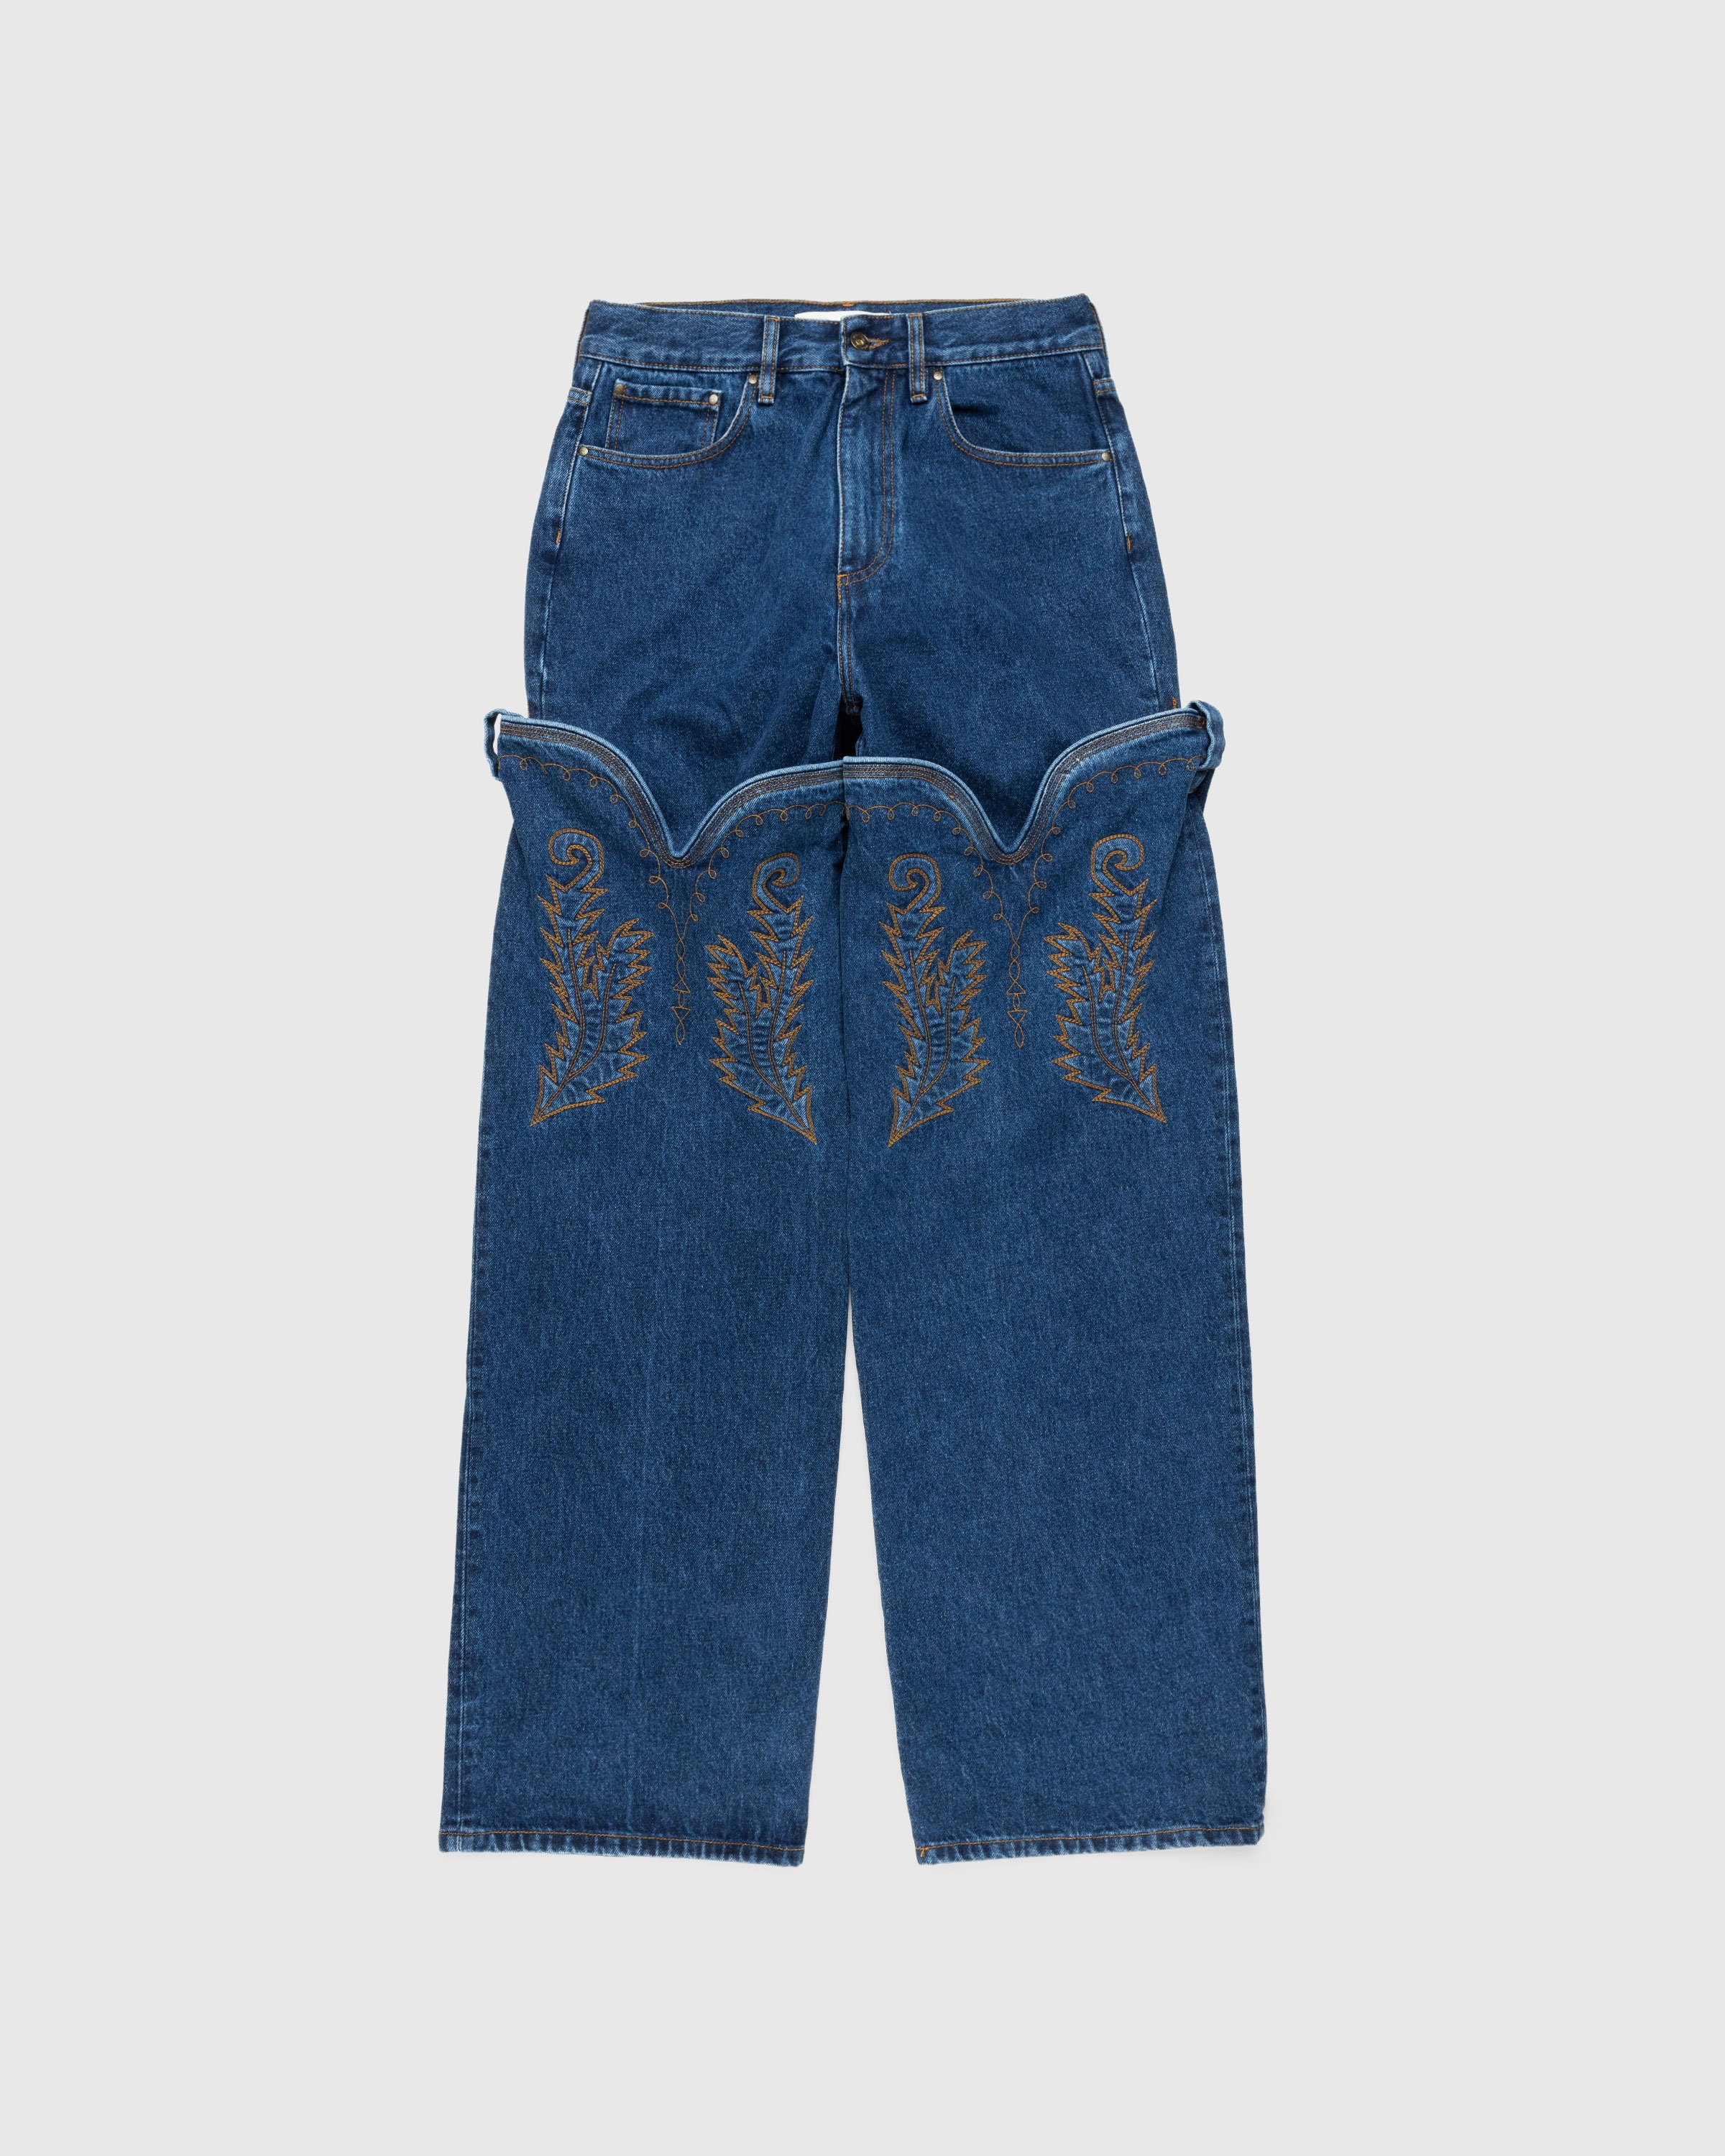 Y/Project - Classic Maxi Cowboy Cuff Jeans Navy - Clothing - Blue - Image 1